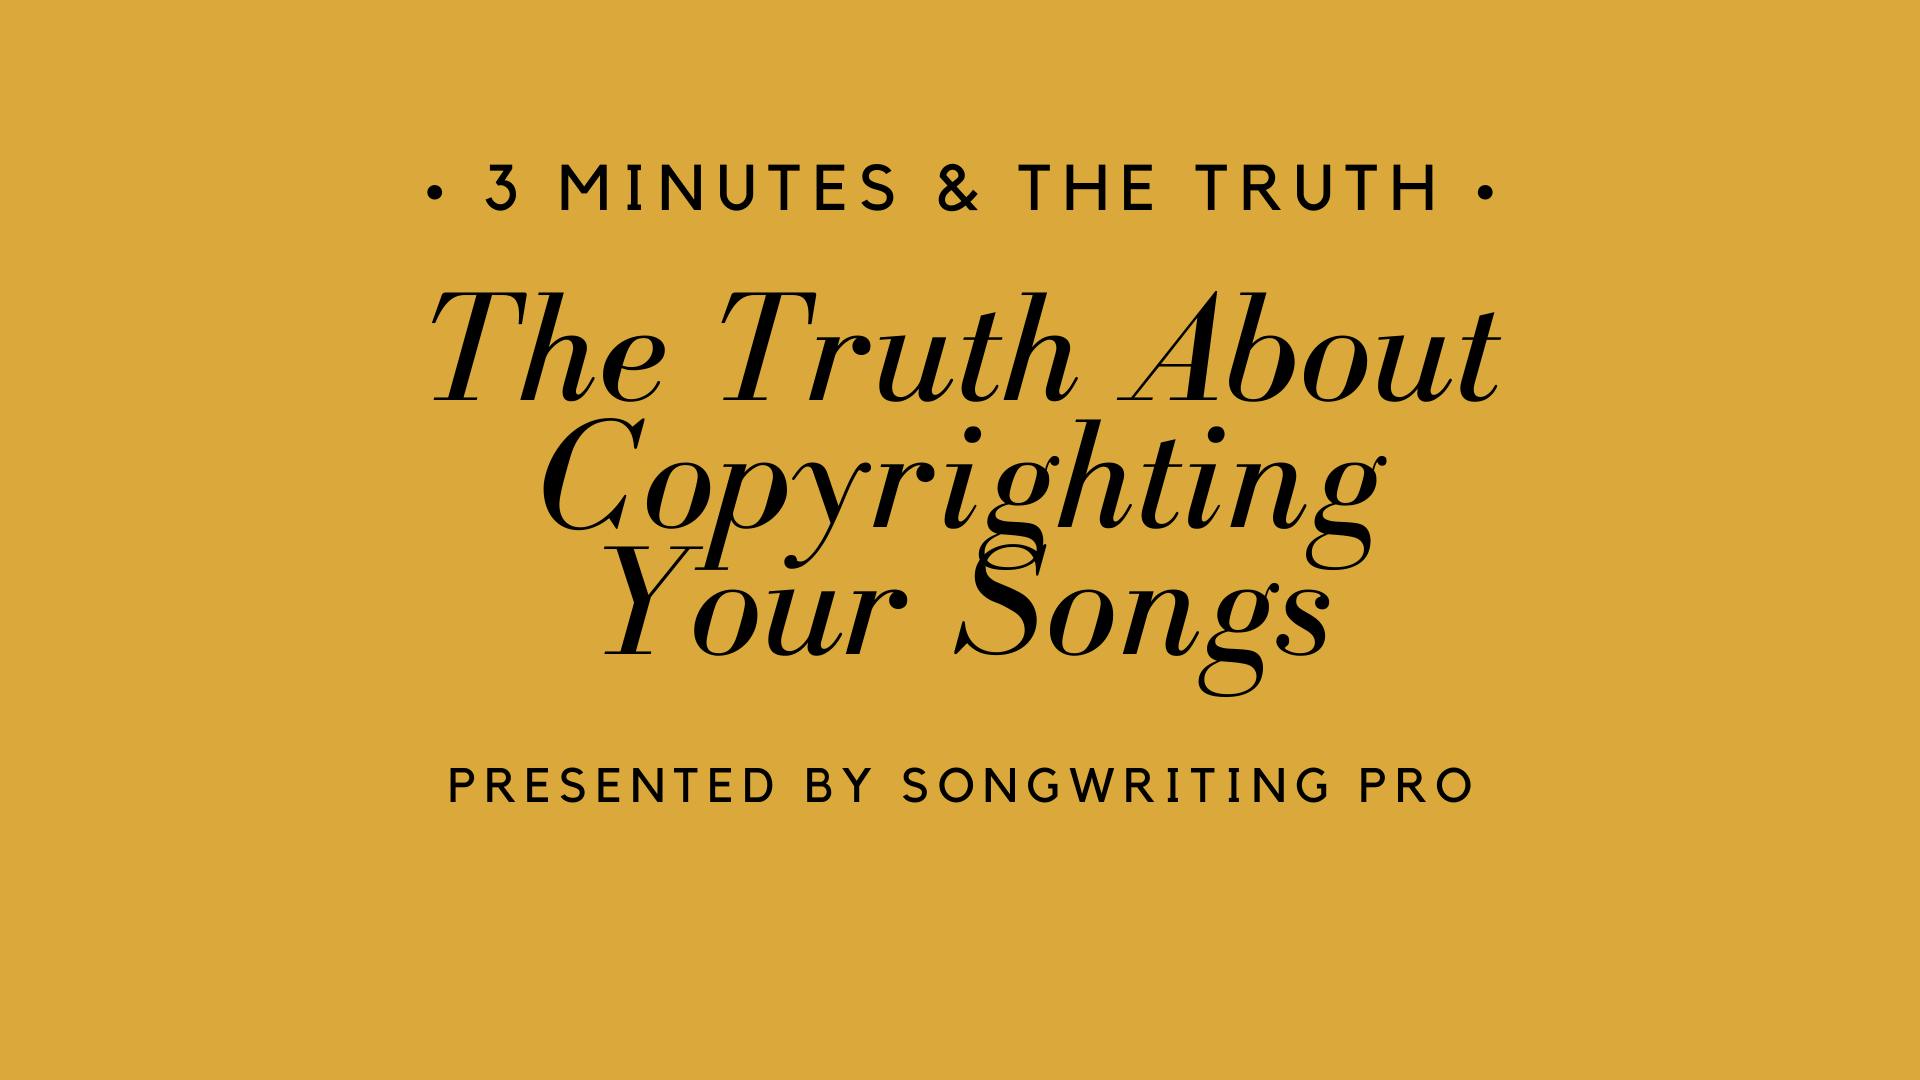 3 Minutes & The Truth: Copyrighting Your Songs